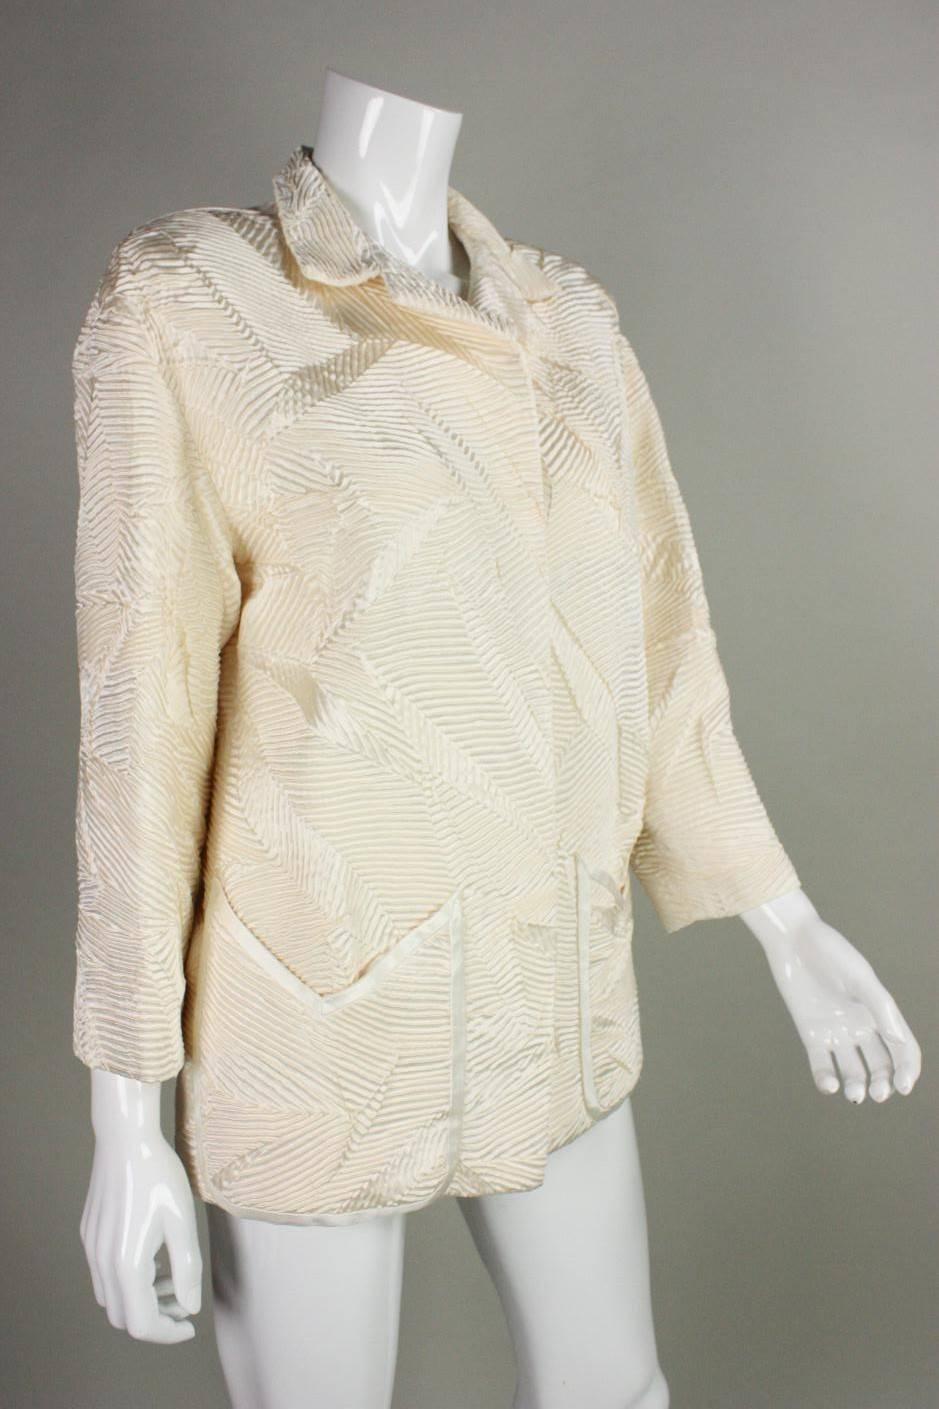 Vintage jacket from James Galanos dates to the 1980's and retailed at I. Magnin.  It is made of cream-colored textured silk.  Turn down collar.  Patch pockets.  No closures.  Fully lined.

Measurements-
Bust: 40